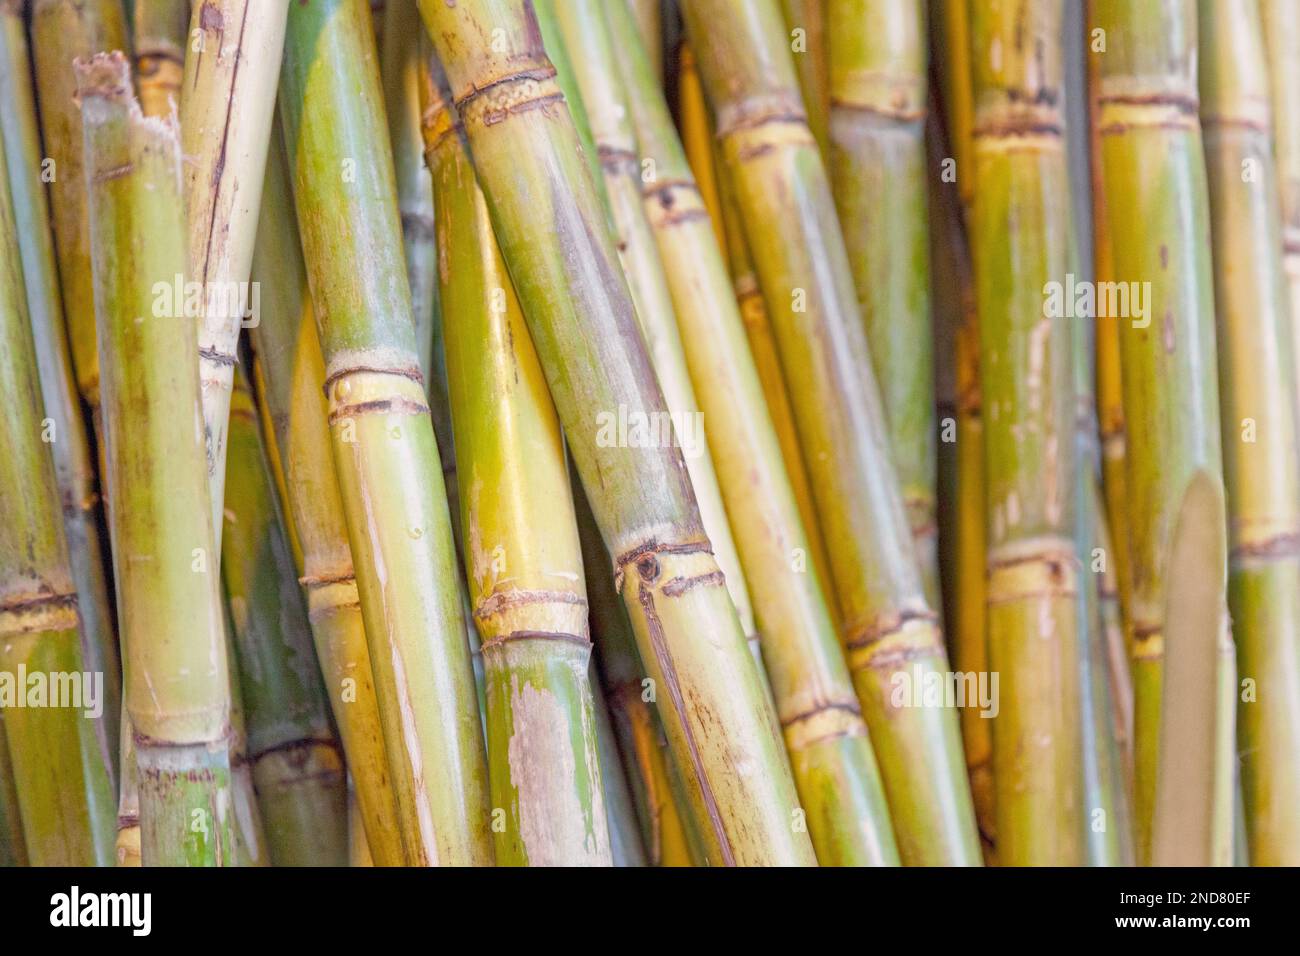 Close-up on a stack of sugarcane for sale on a market stall. Stock Photo